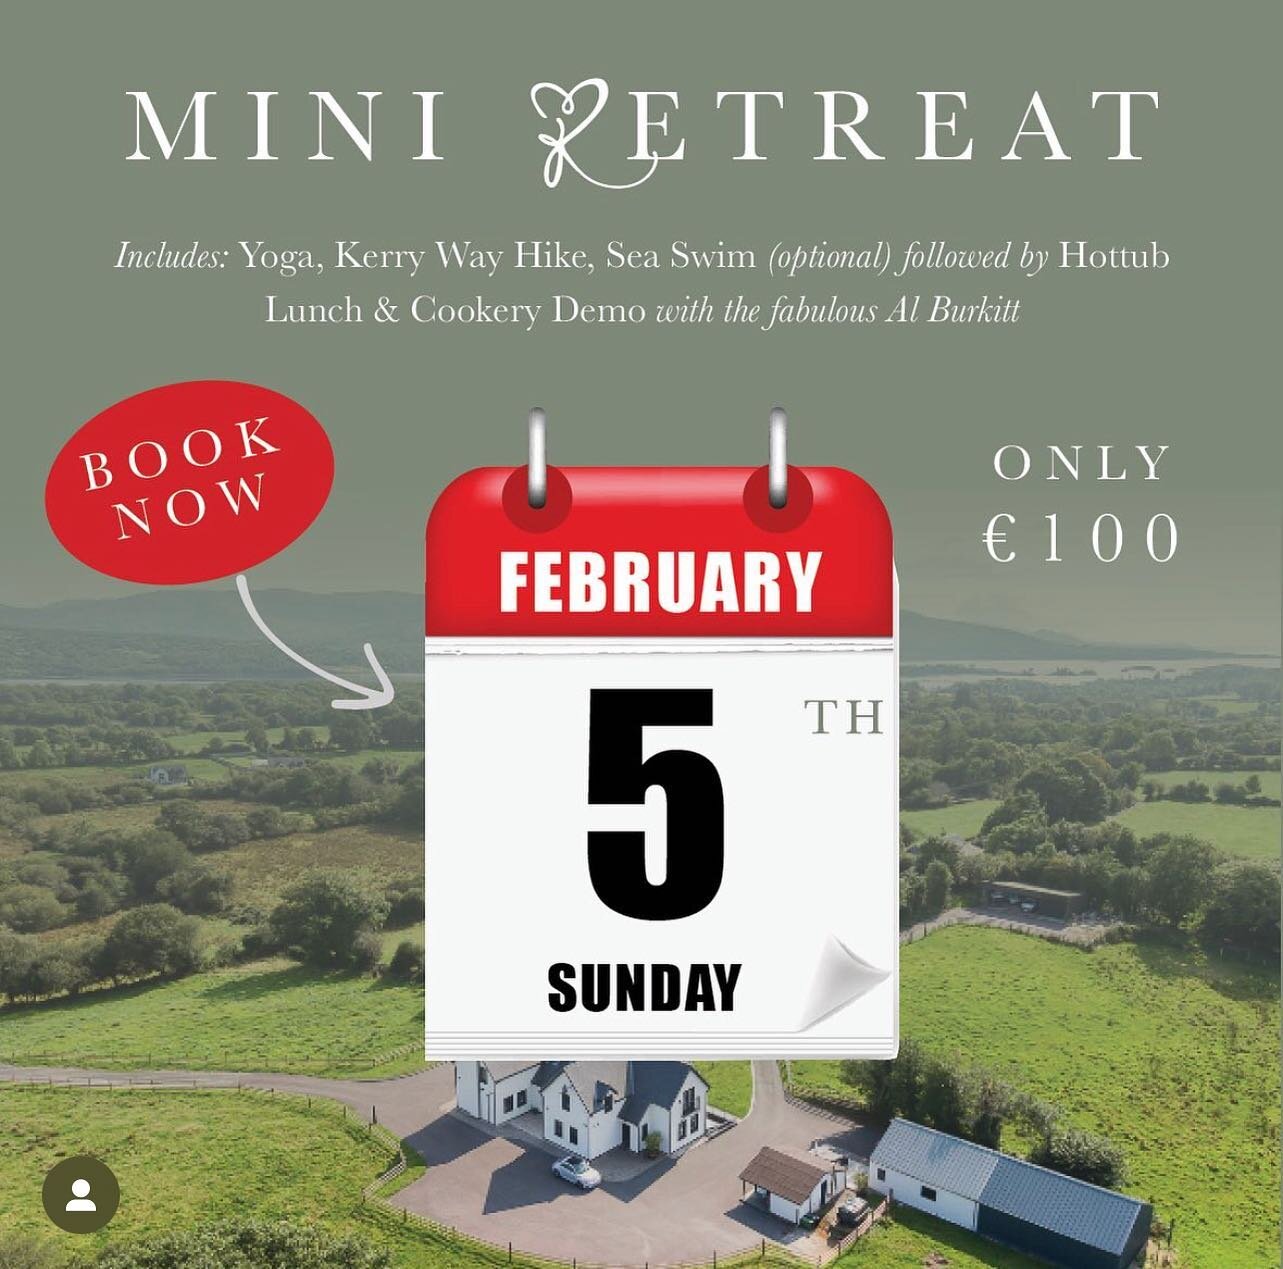 Grab our last two spots for this weekends retreat, here&rsquo;s can you can expect:

9am welcome 
9.15 yoga 
10.30 Kerry Way Hike 
Sea Swim (optional)
Followed by Hottub 

2pm Delicious lunch 
3pm Cookery Demo with the fabulous Al Burkitt 

4pm Finis